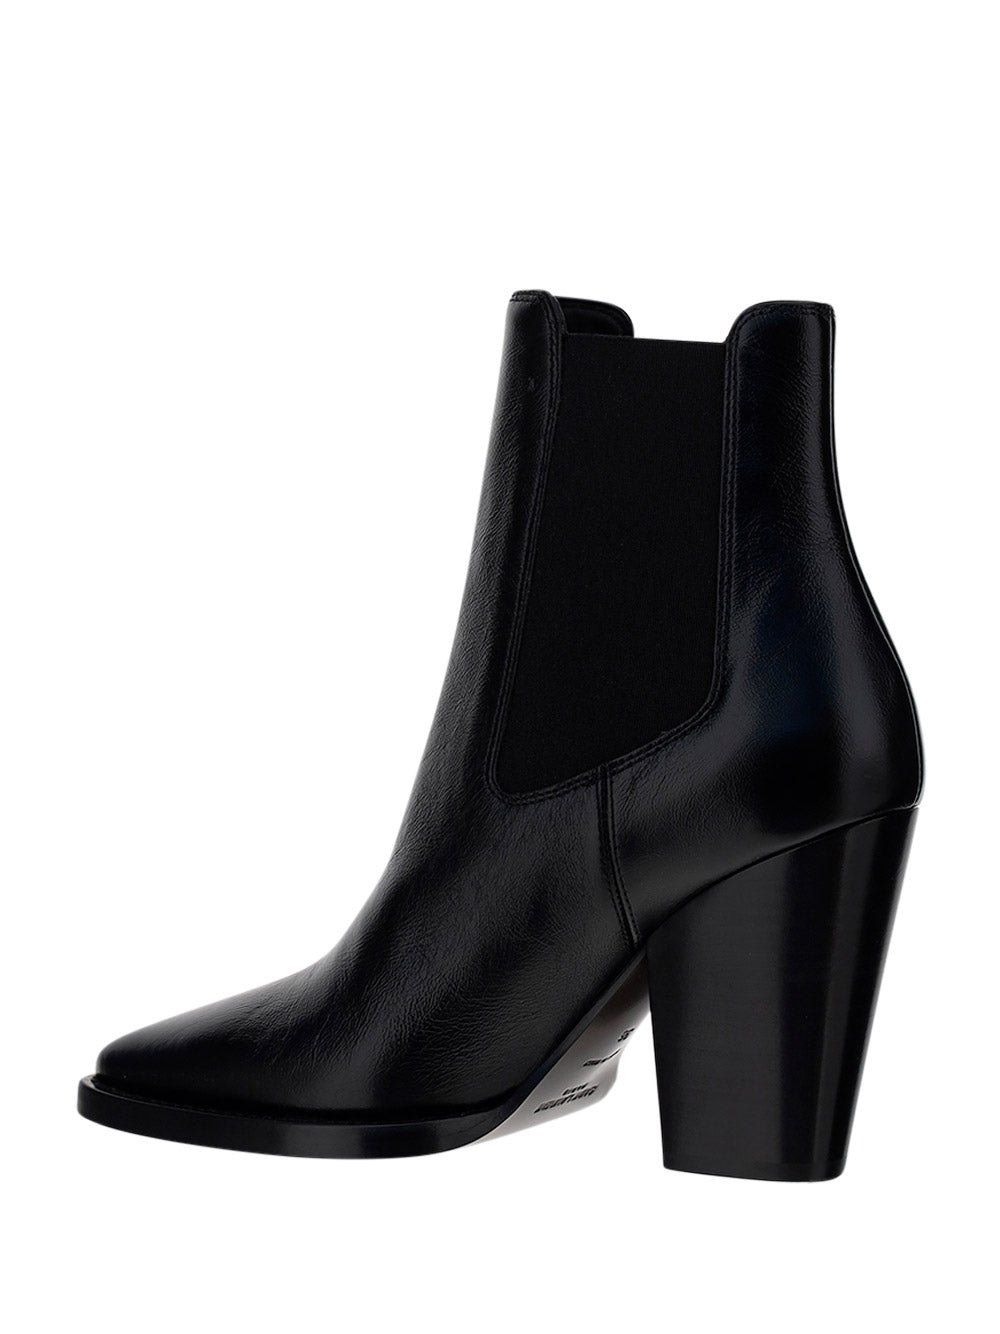 Theo Chelsea Boots in Smooth Leather - Black